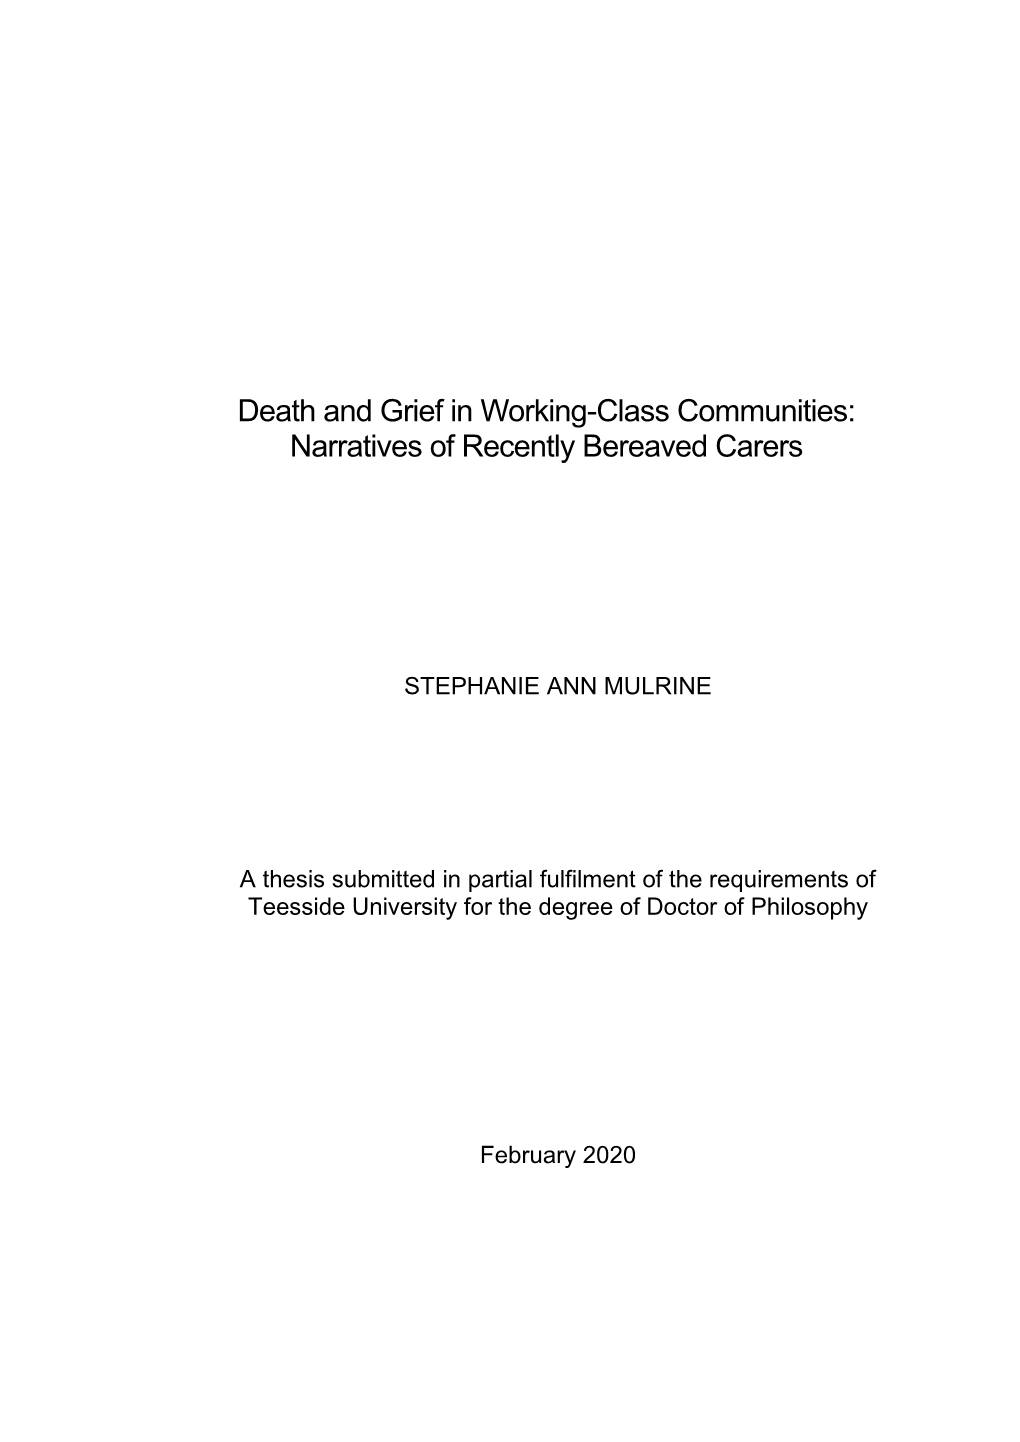 Death and Grief in Working-Class Communities: Narratives of Recently Bereaved Carers